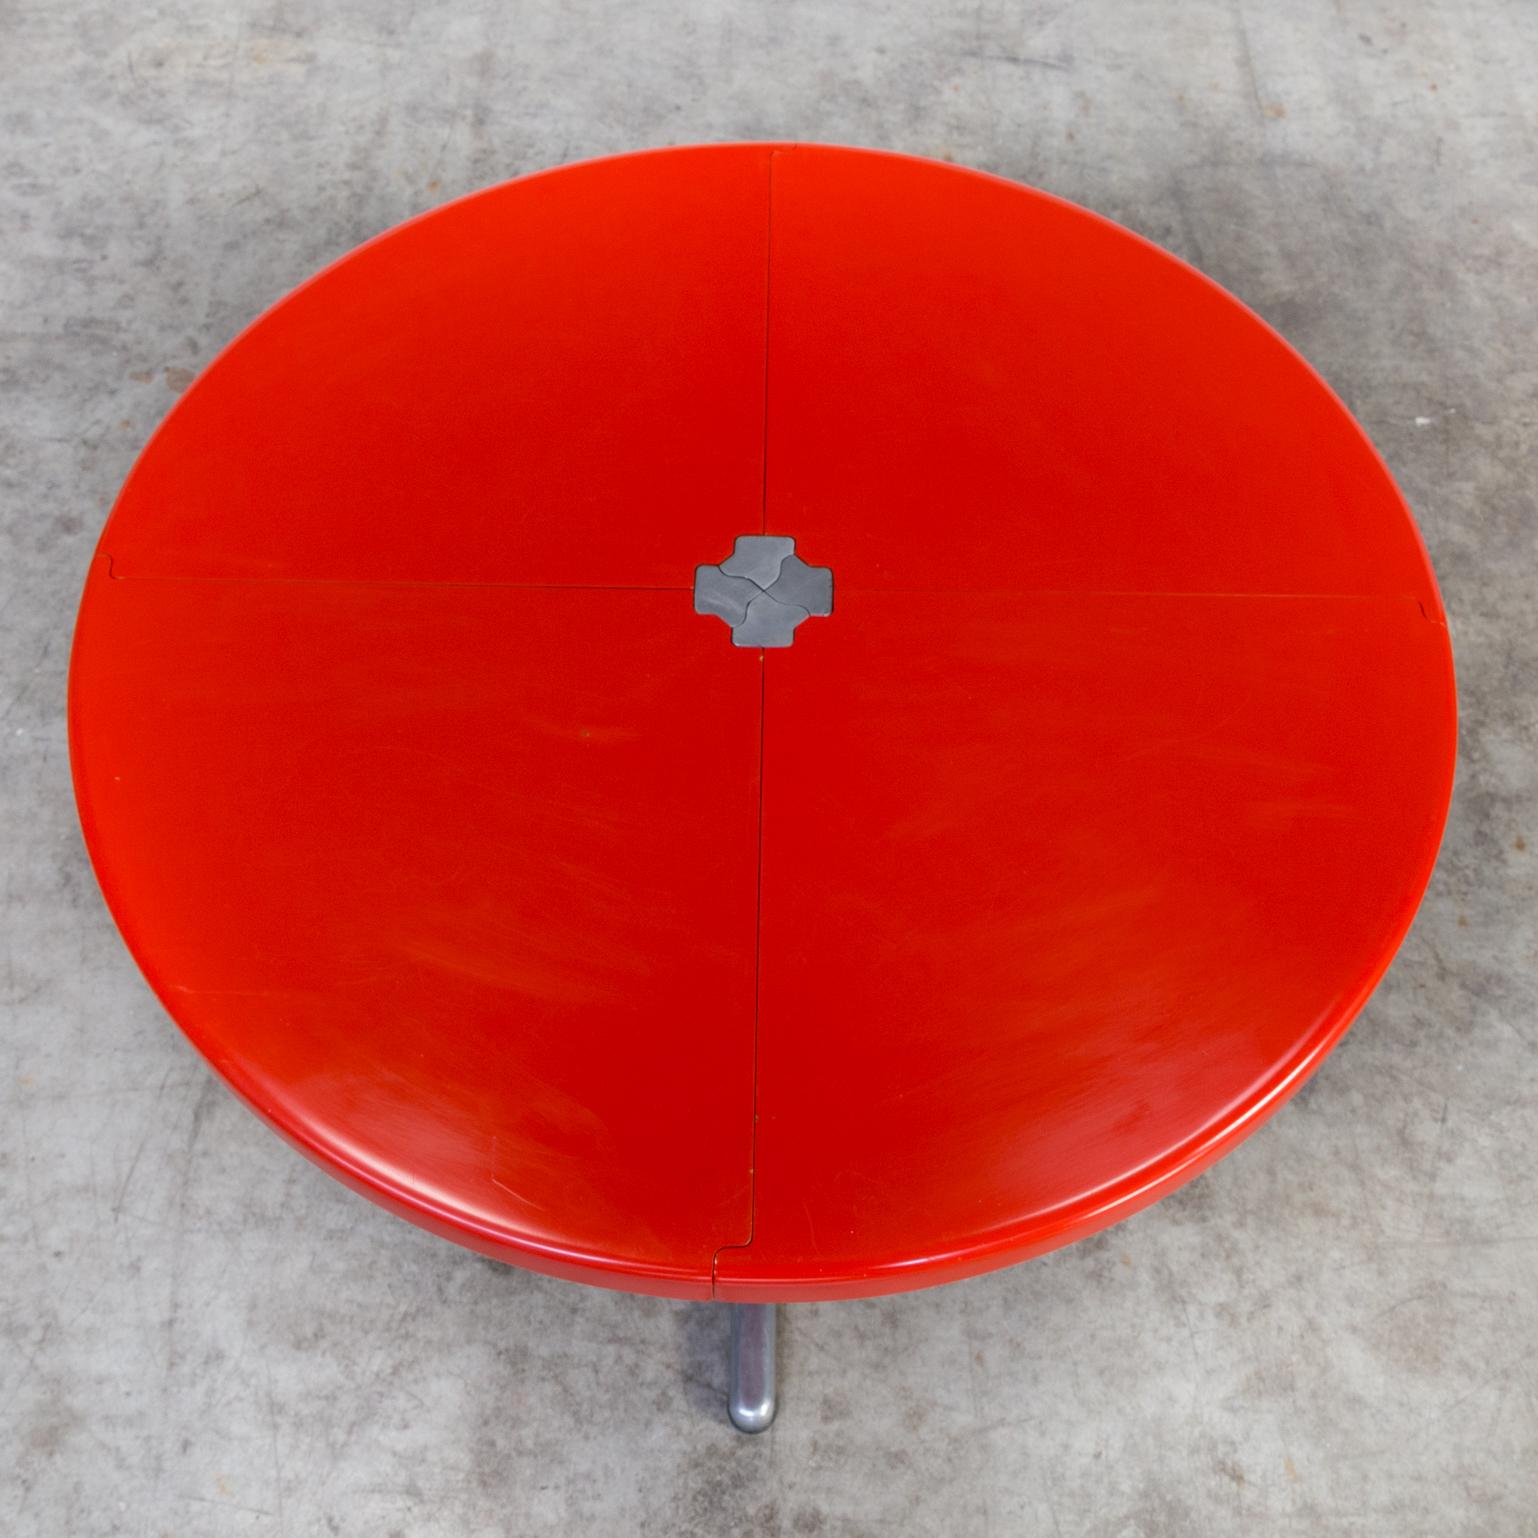 1970s Giancarlo Piretti Foldable Dining Table ‘Plana’ for Castelli For Sale 8